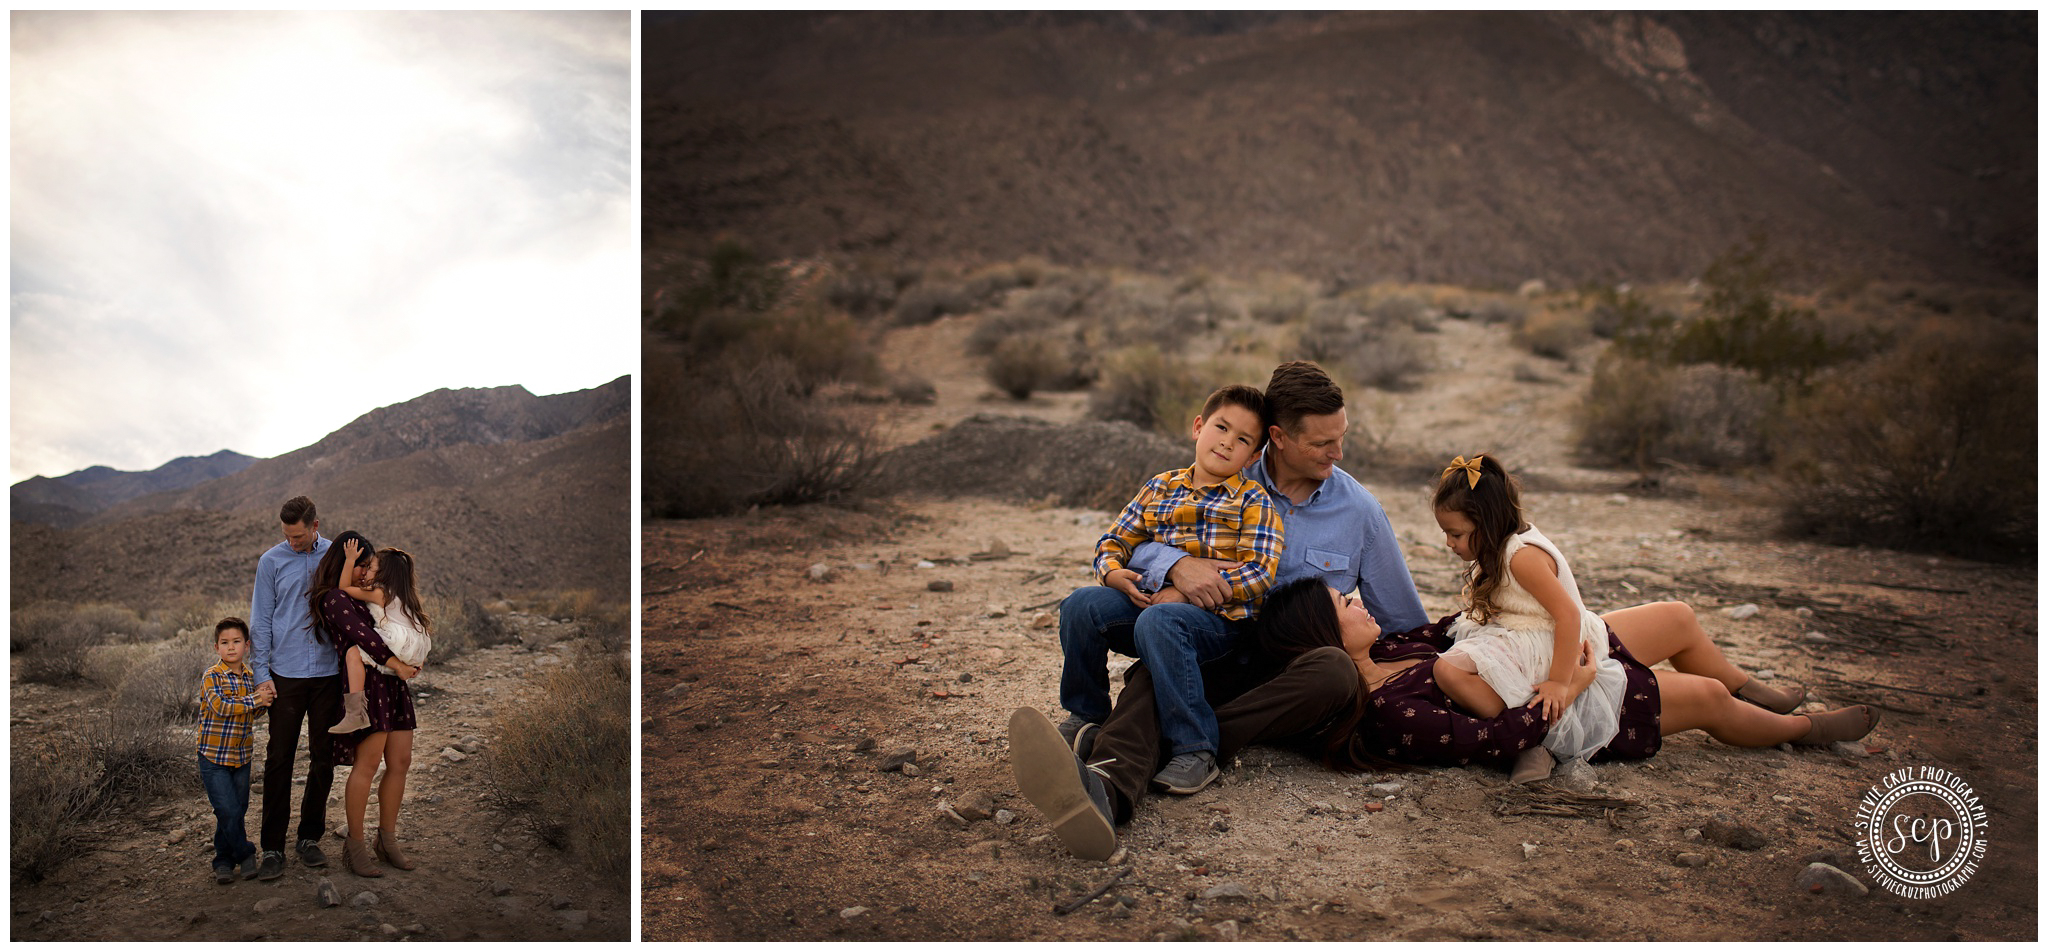 Candid and modern family photographer in Orange Count offering desert family photo shoots